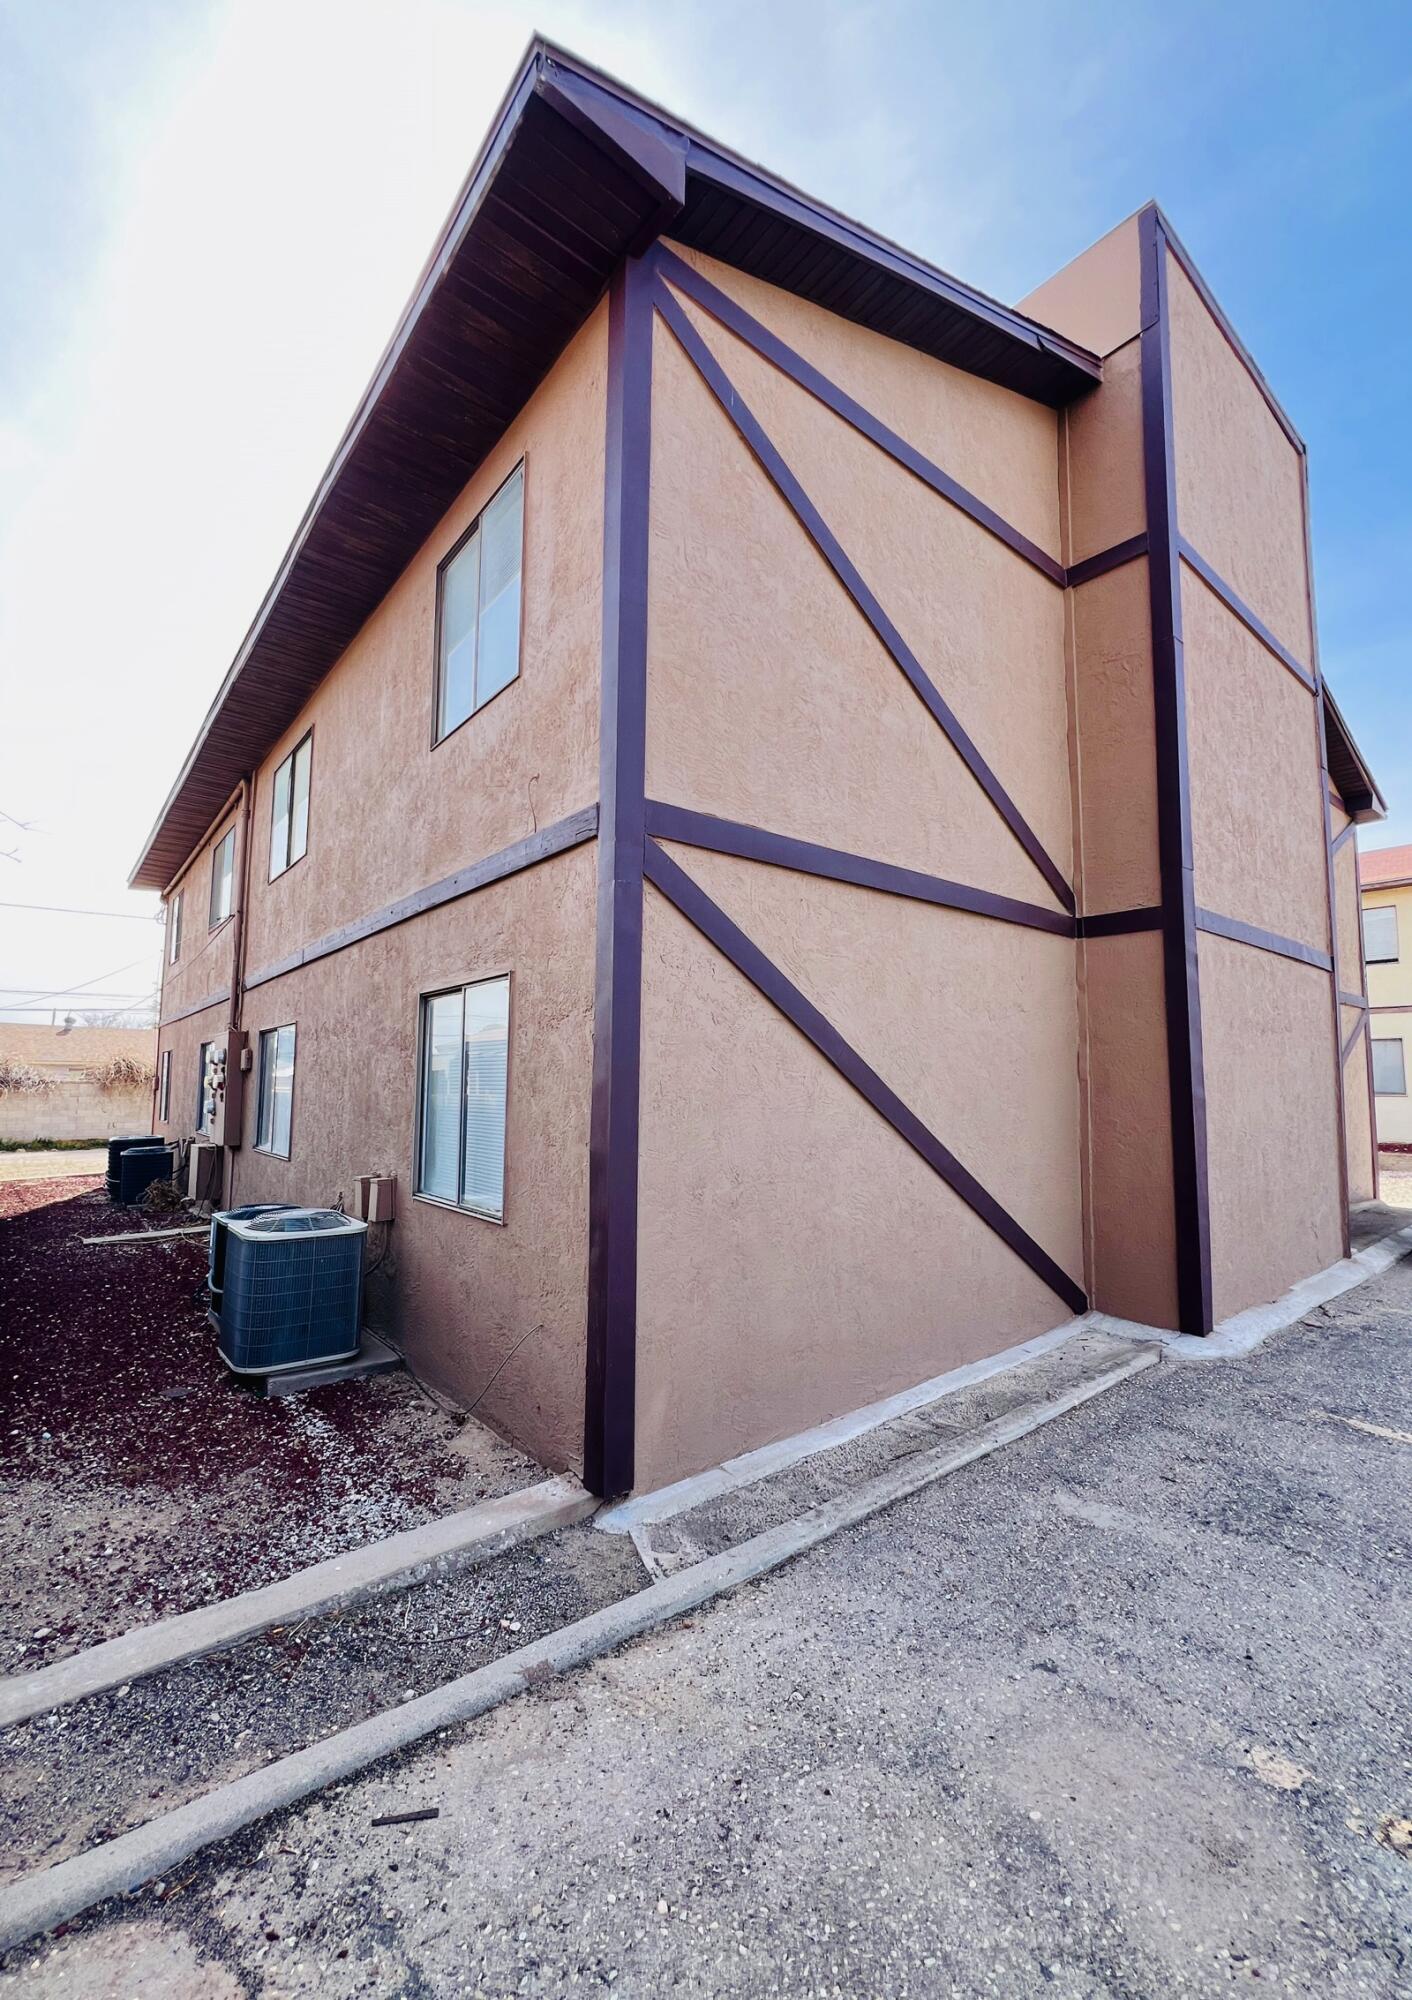 1111 W Mckay Street, Carlsbad, New Mexico 88220, 2 Bedrooms Bedrooms, ,1 BathroomBathrooms,Residential Income,For Sale,1111 W Mckay Street,1061572